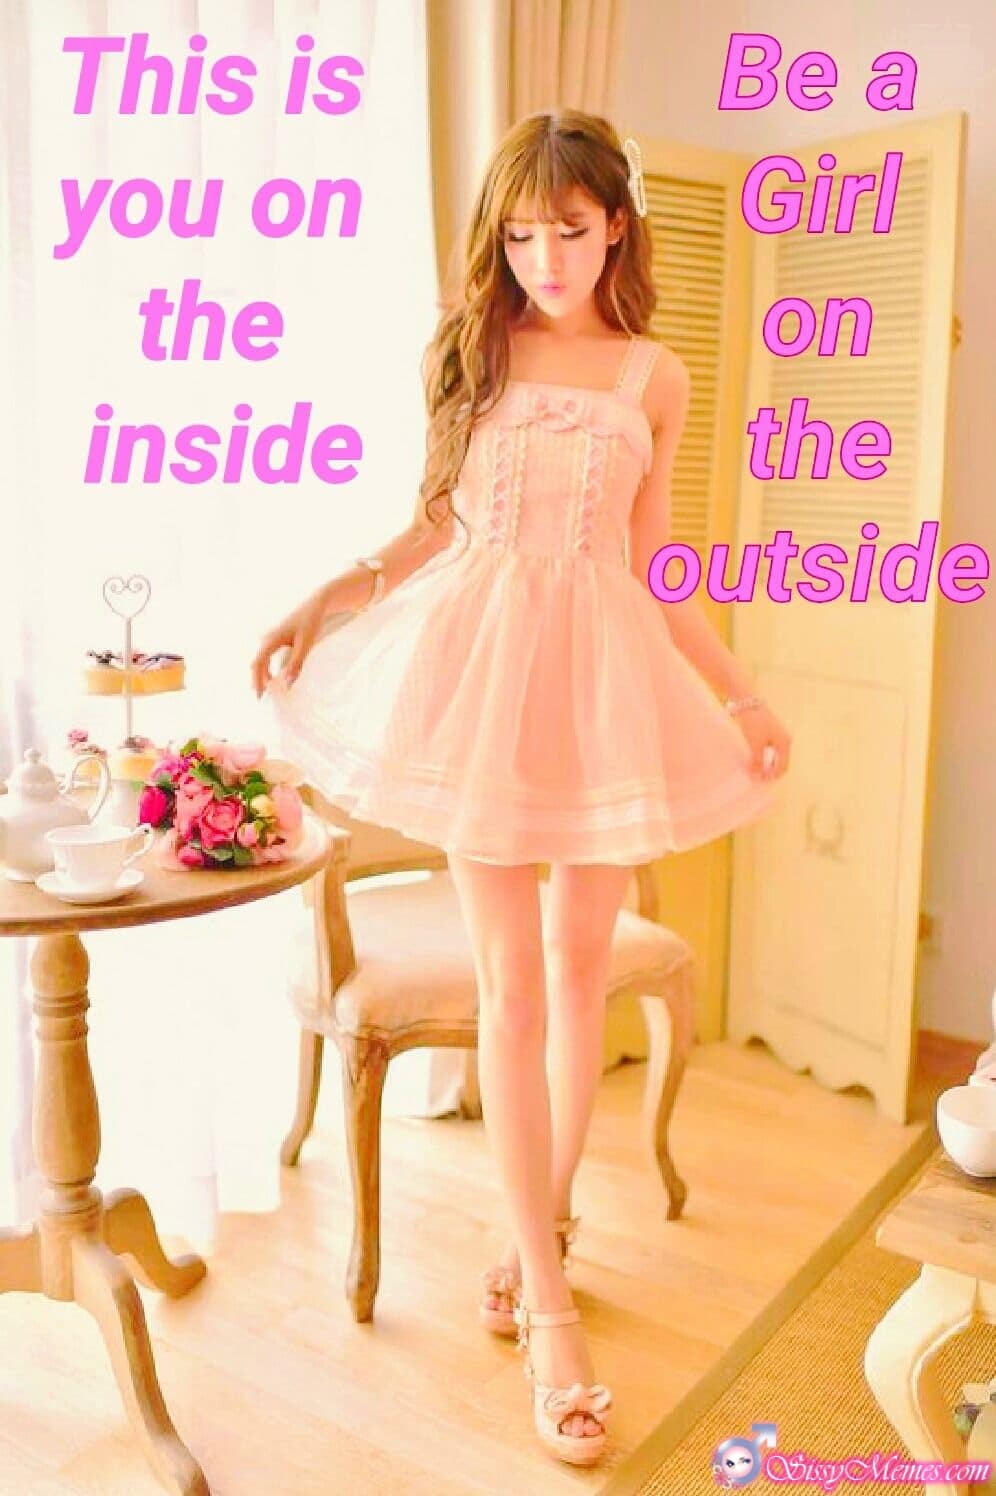 Feminization Femboy Asian hotwife caption: This is you on the inside. Be a Girl on the outside Asian Cd in a Beautiful Girly Dress